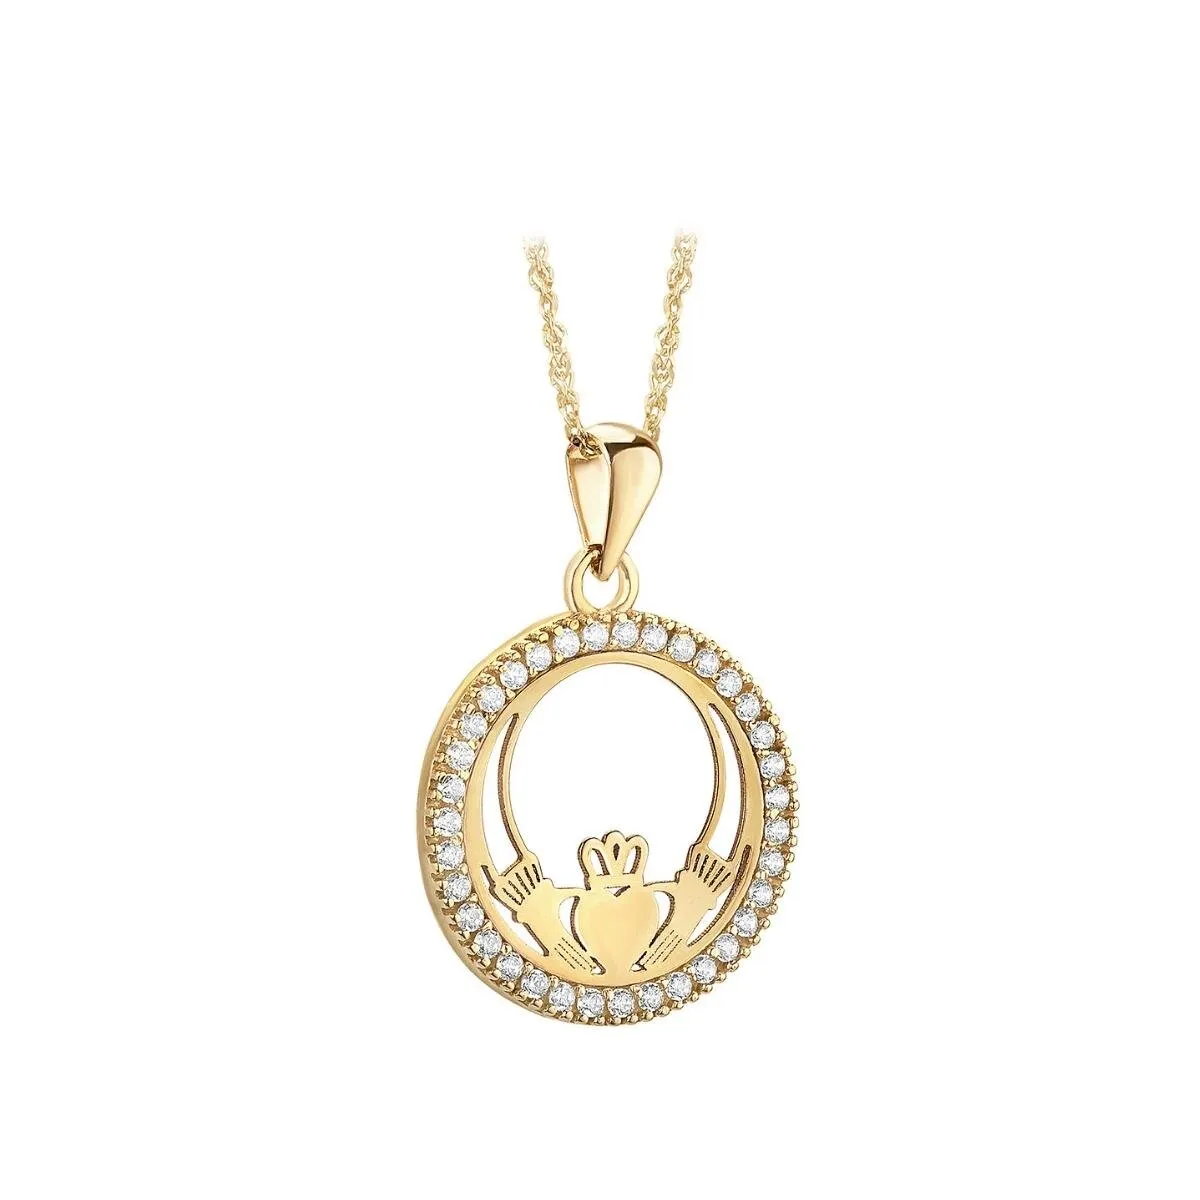 10k Gold Round Claddagh Necklace with Cubic Zirconia Stones...